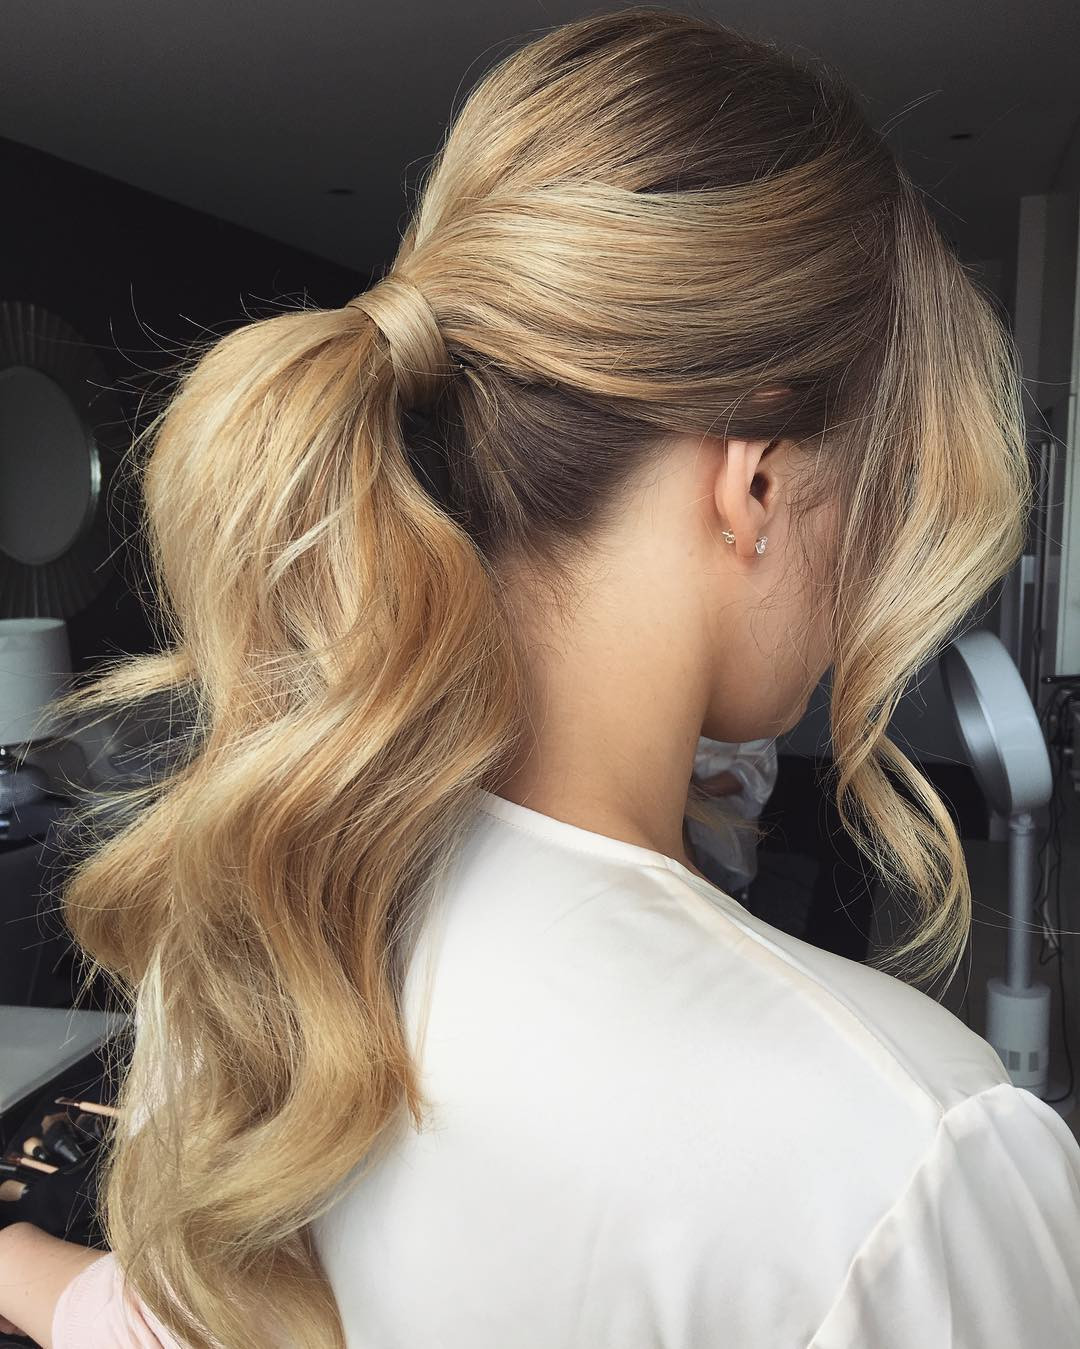 Prom Ponytail Hairstyles
 40 Irresistible Hairstyles for Brides and Bridesmaids